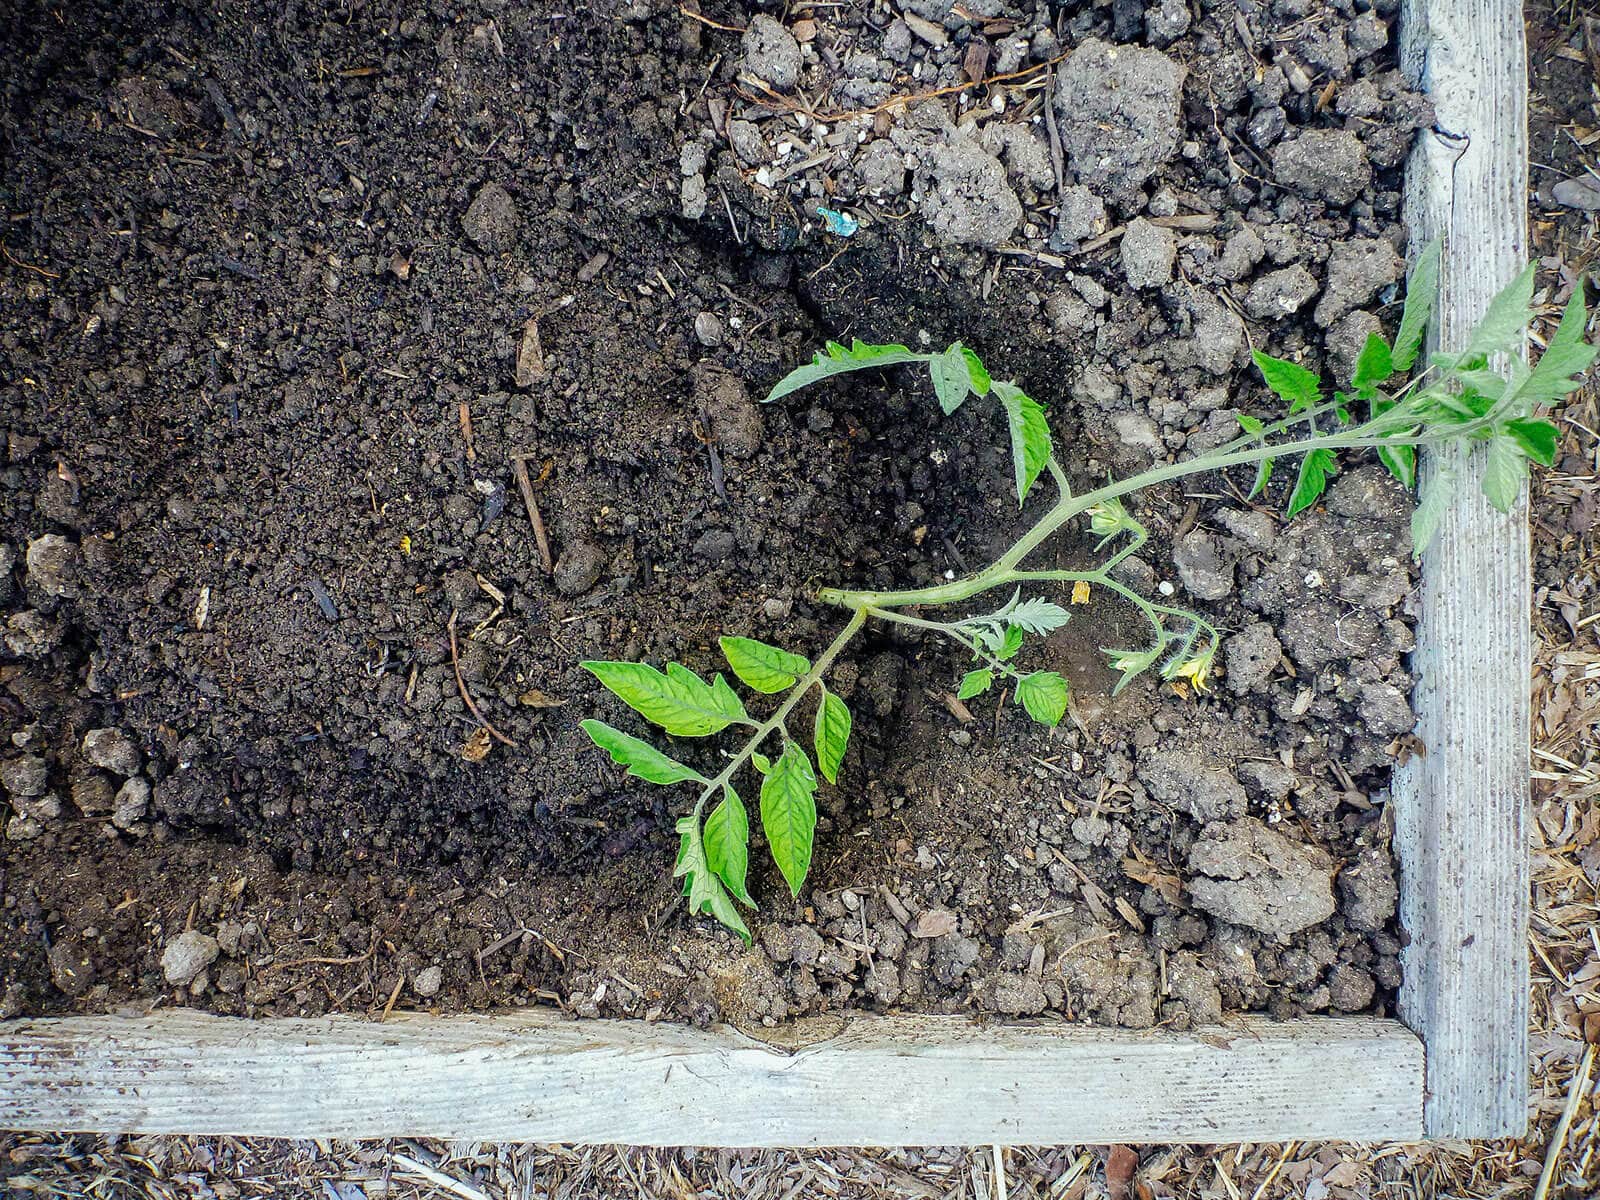 Fill the trench with soil, covering the root ball and the bottom of the stem but leaving the branches and leaves exposed